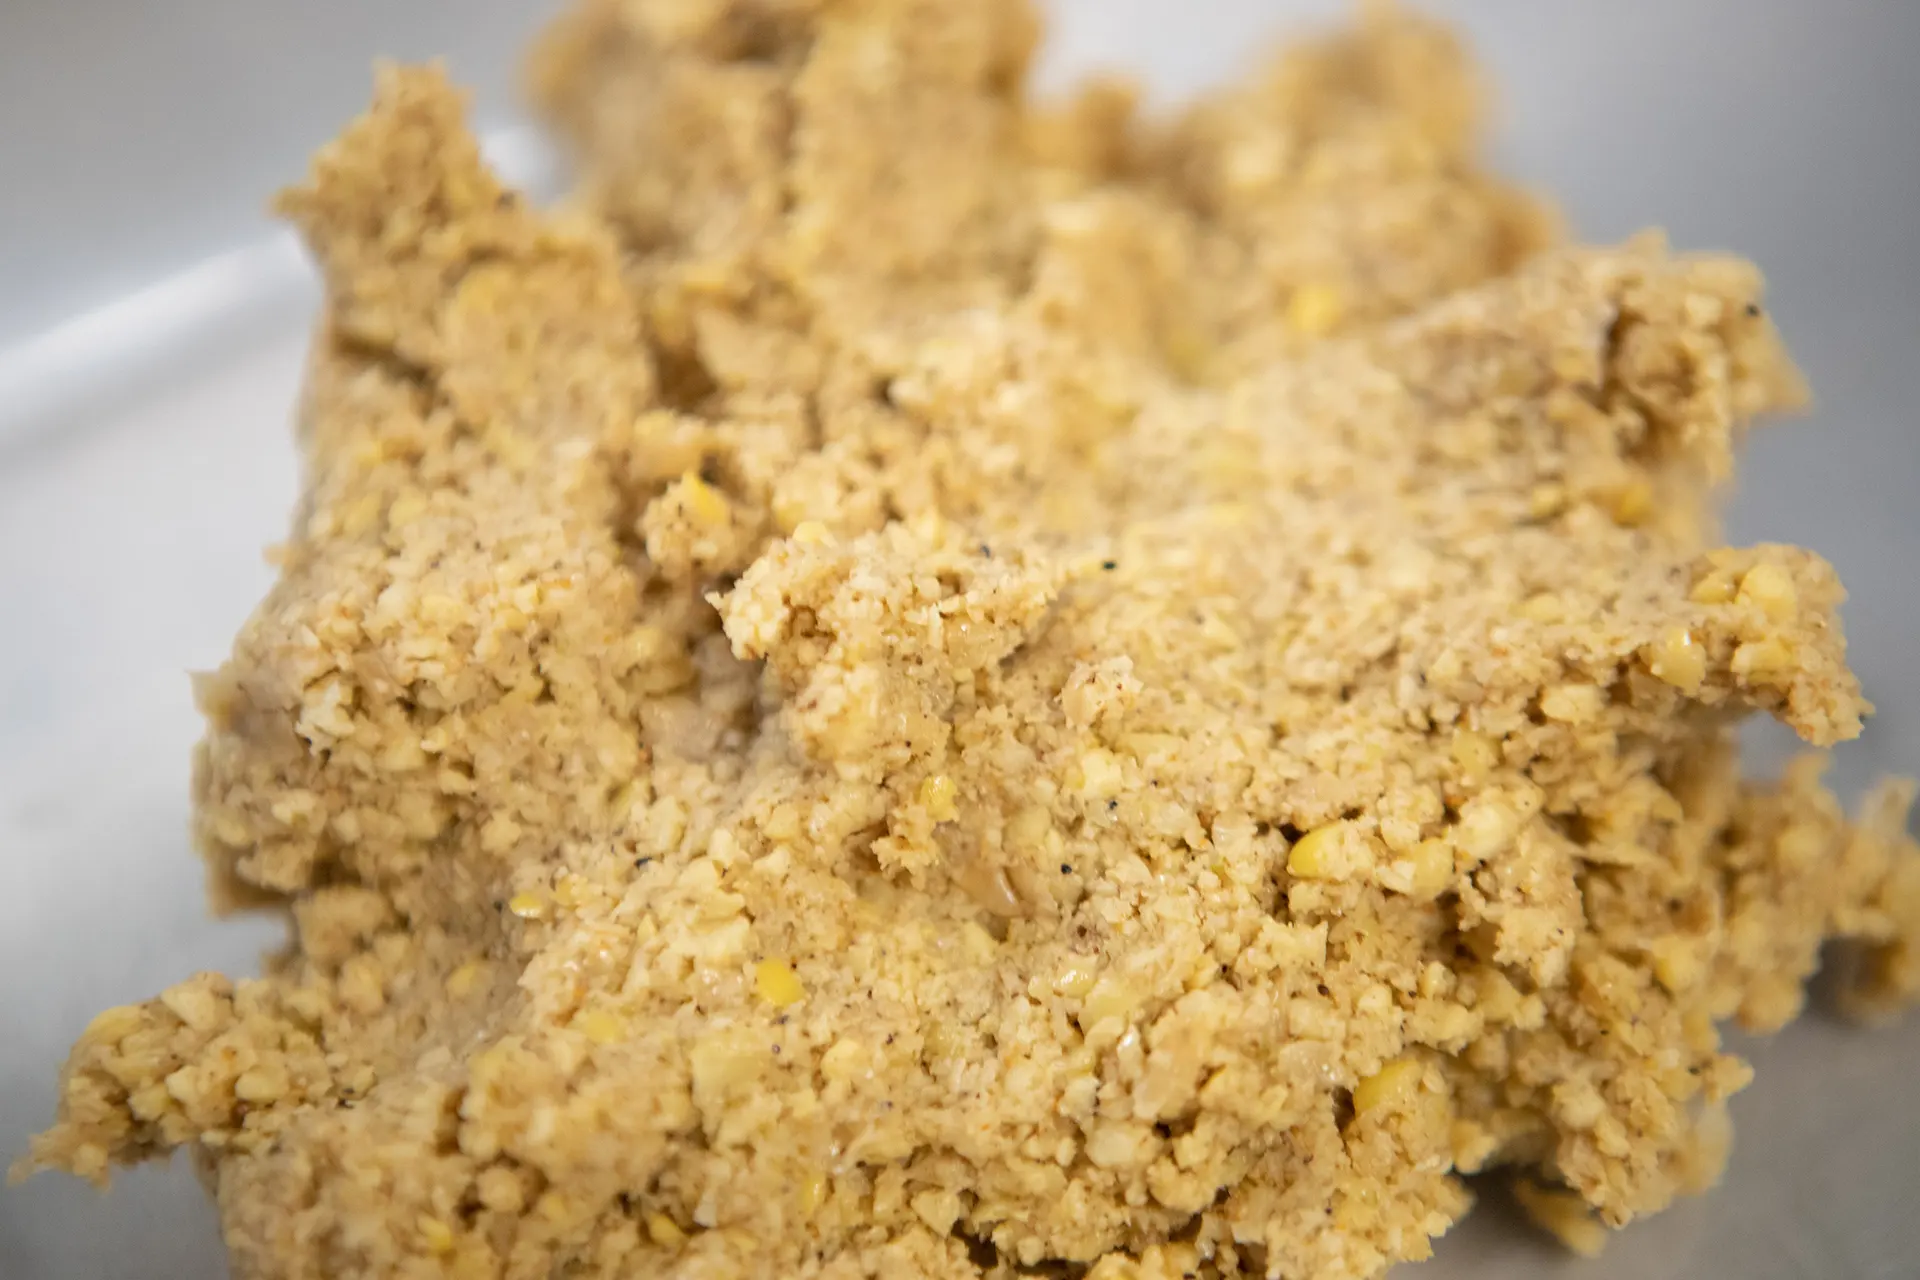 A portion of uncooked yellow and tan colored Falafel mixture is depicted up close in a metallic bowl.